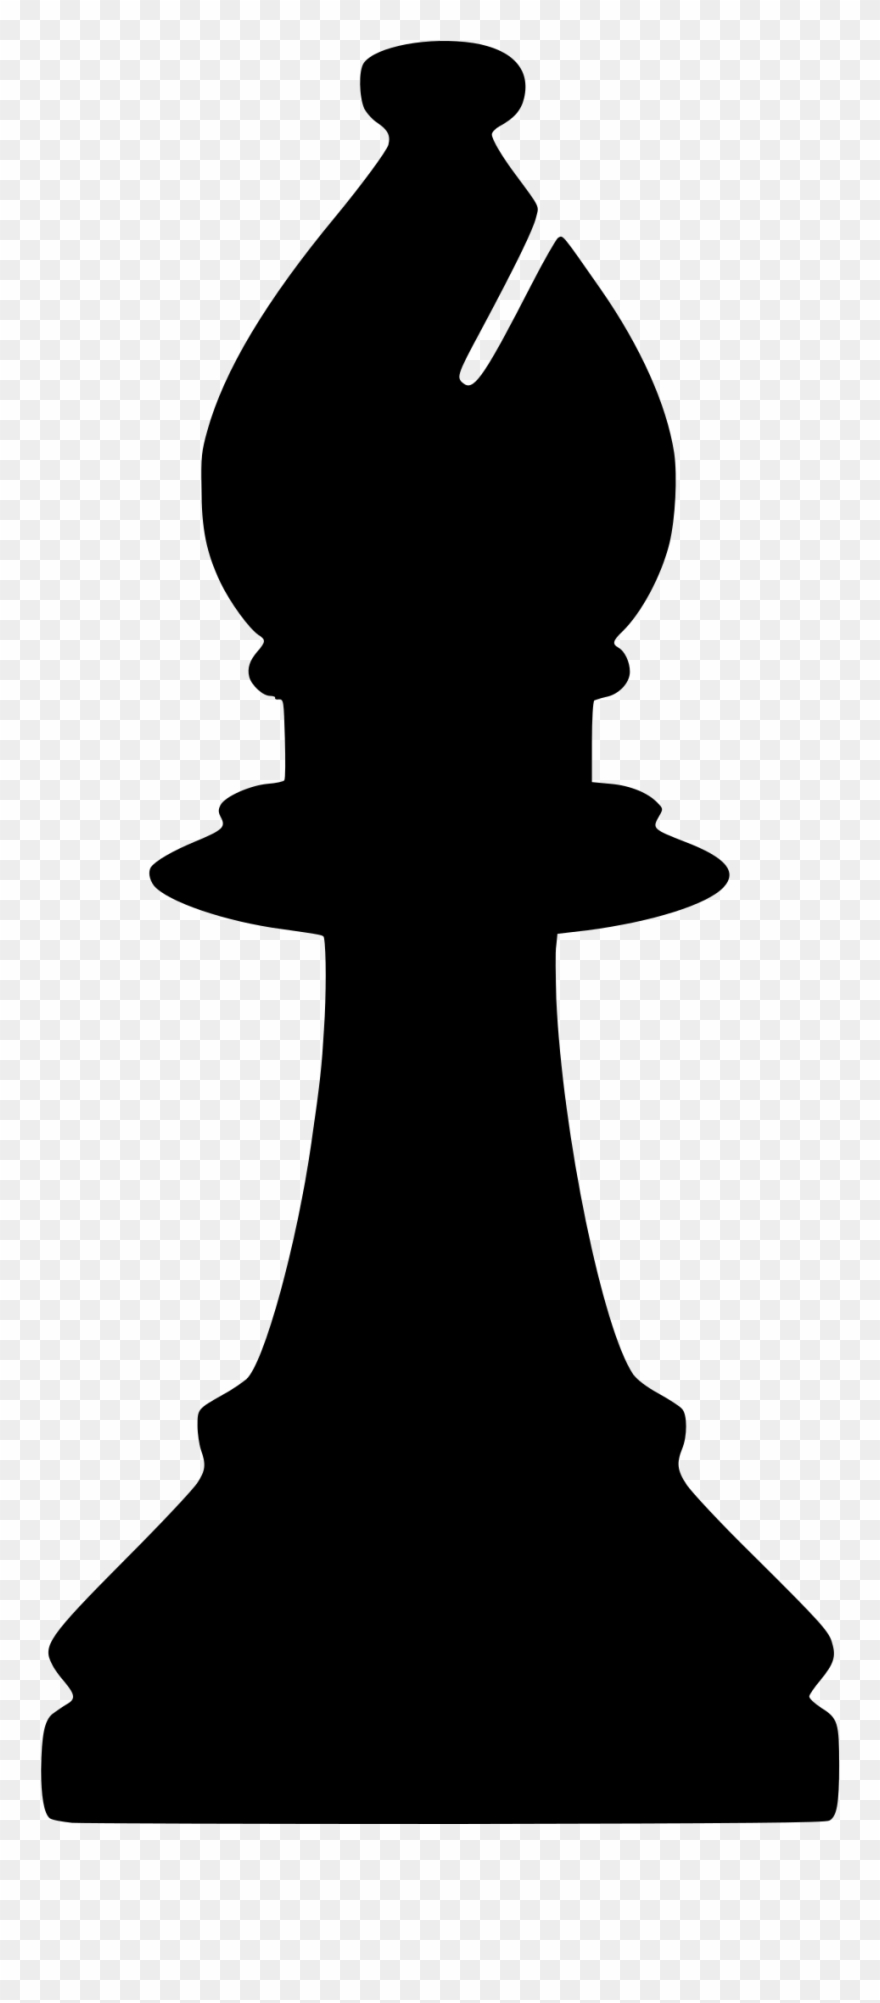 Clipart silhouette chess.